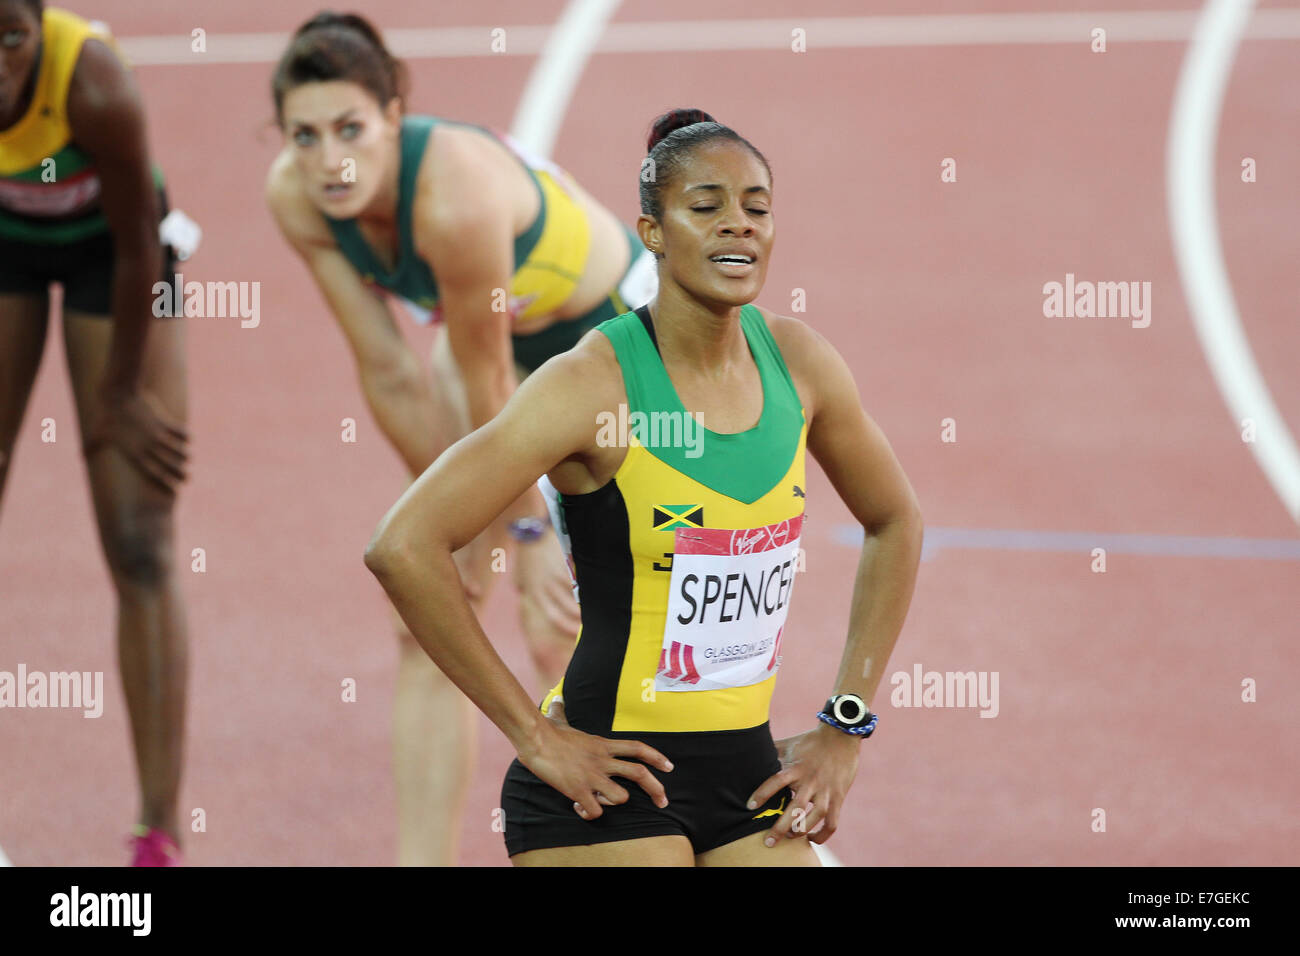 Kaliese SPENCER of Jamaica after winning in the womens 400m Hurdles in the athletics at Hampden Park, in the 2014 Commonwealths Stock Photo